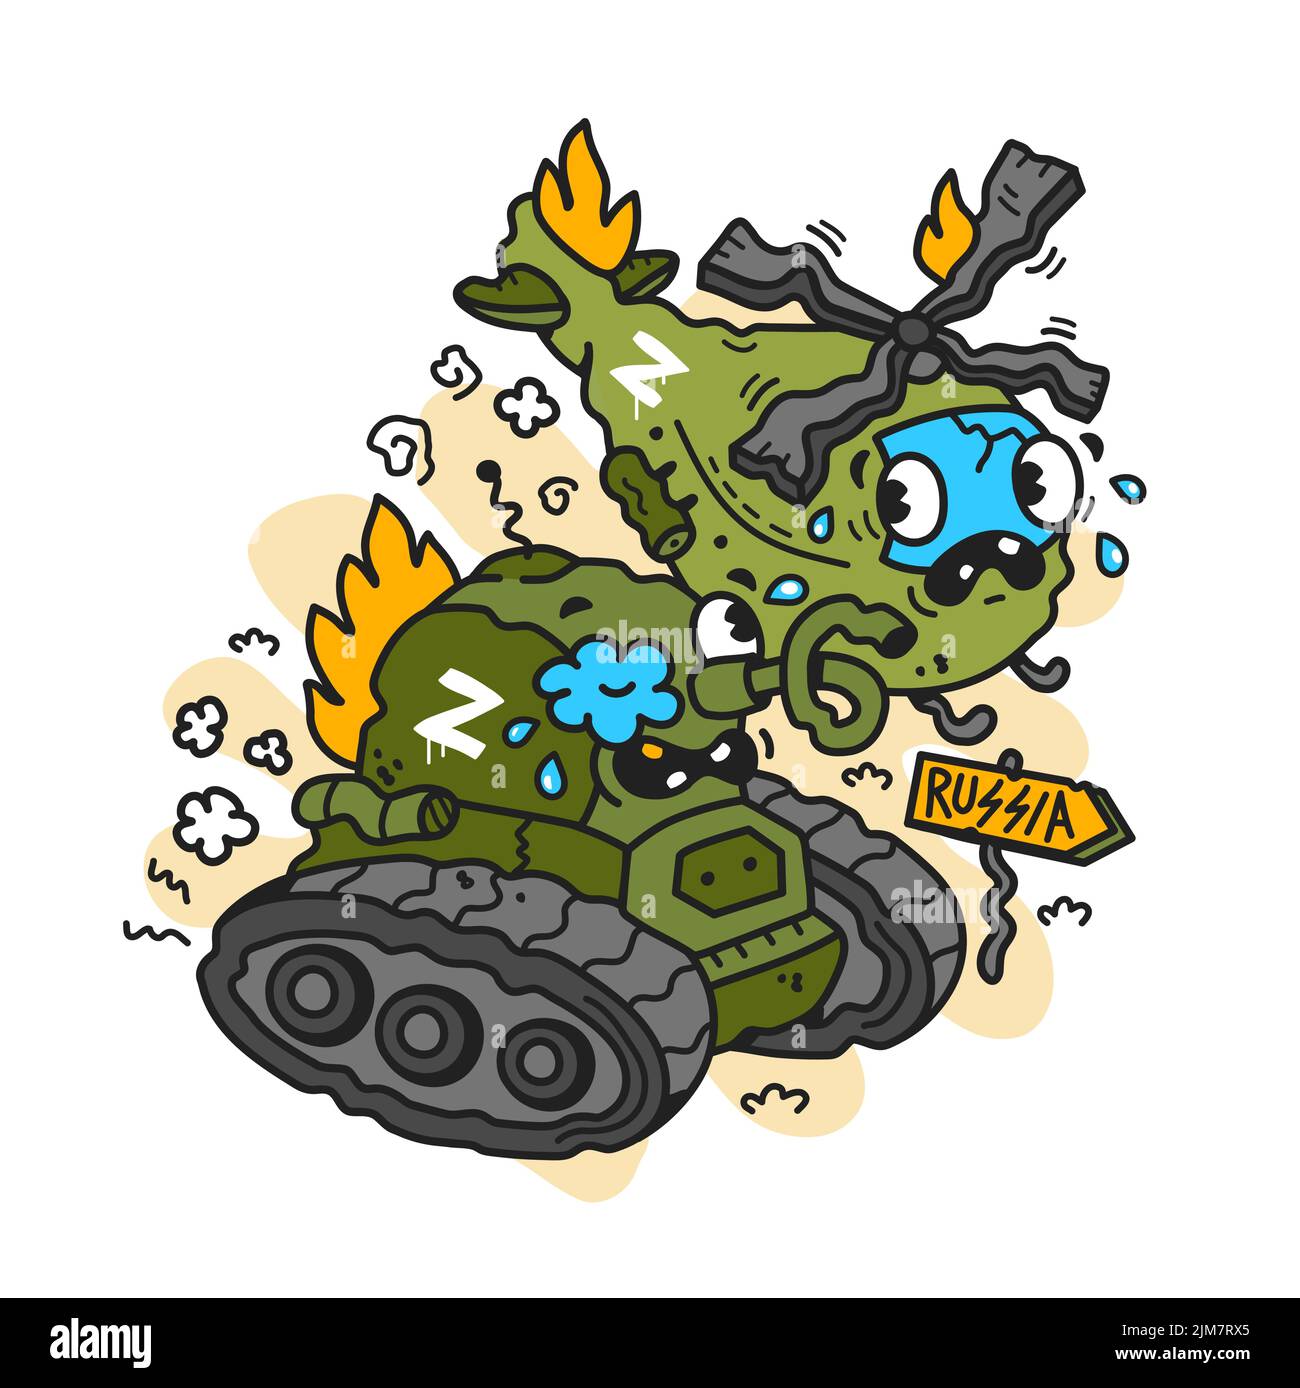 Russian tank and helicopter after war in Ukraine. Vector cartoon character illustration design. Isolated on white background. Russian invasion, agression in Ukraine concept Stock Vector